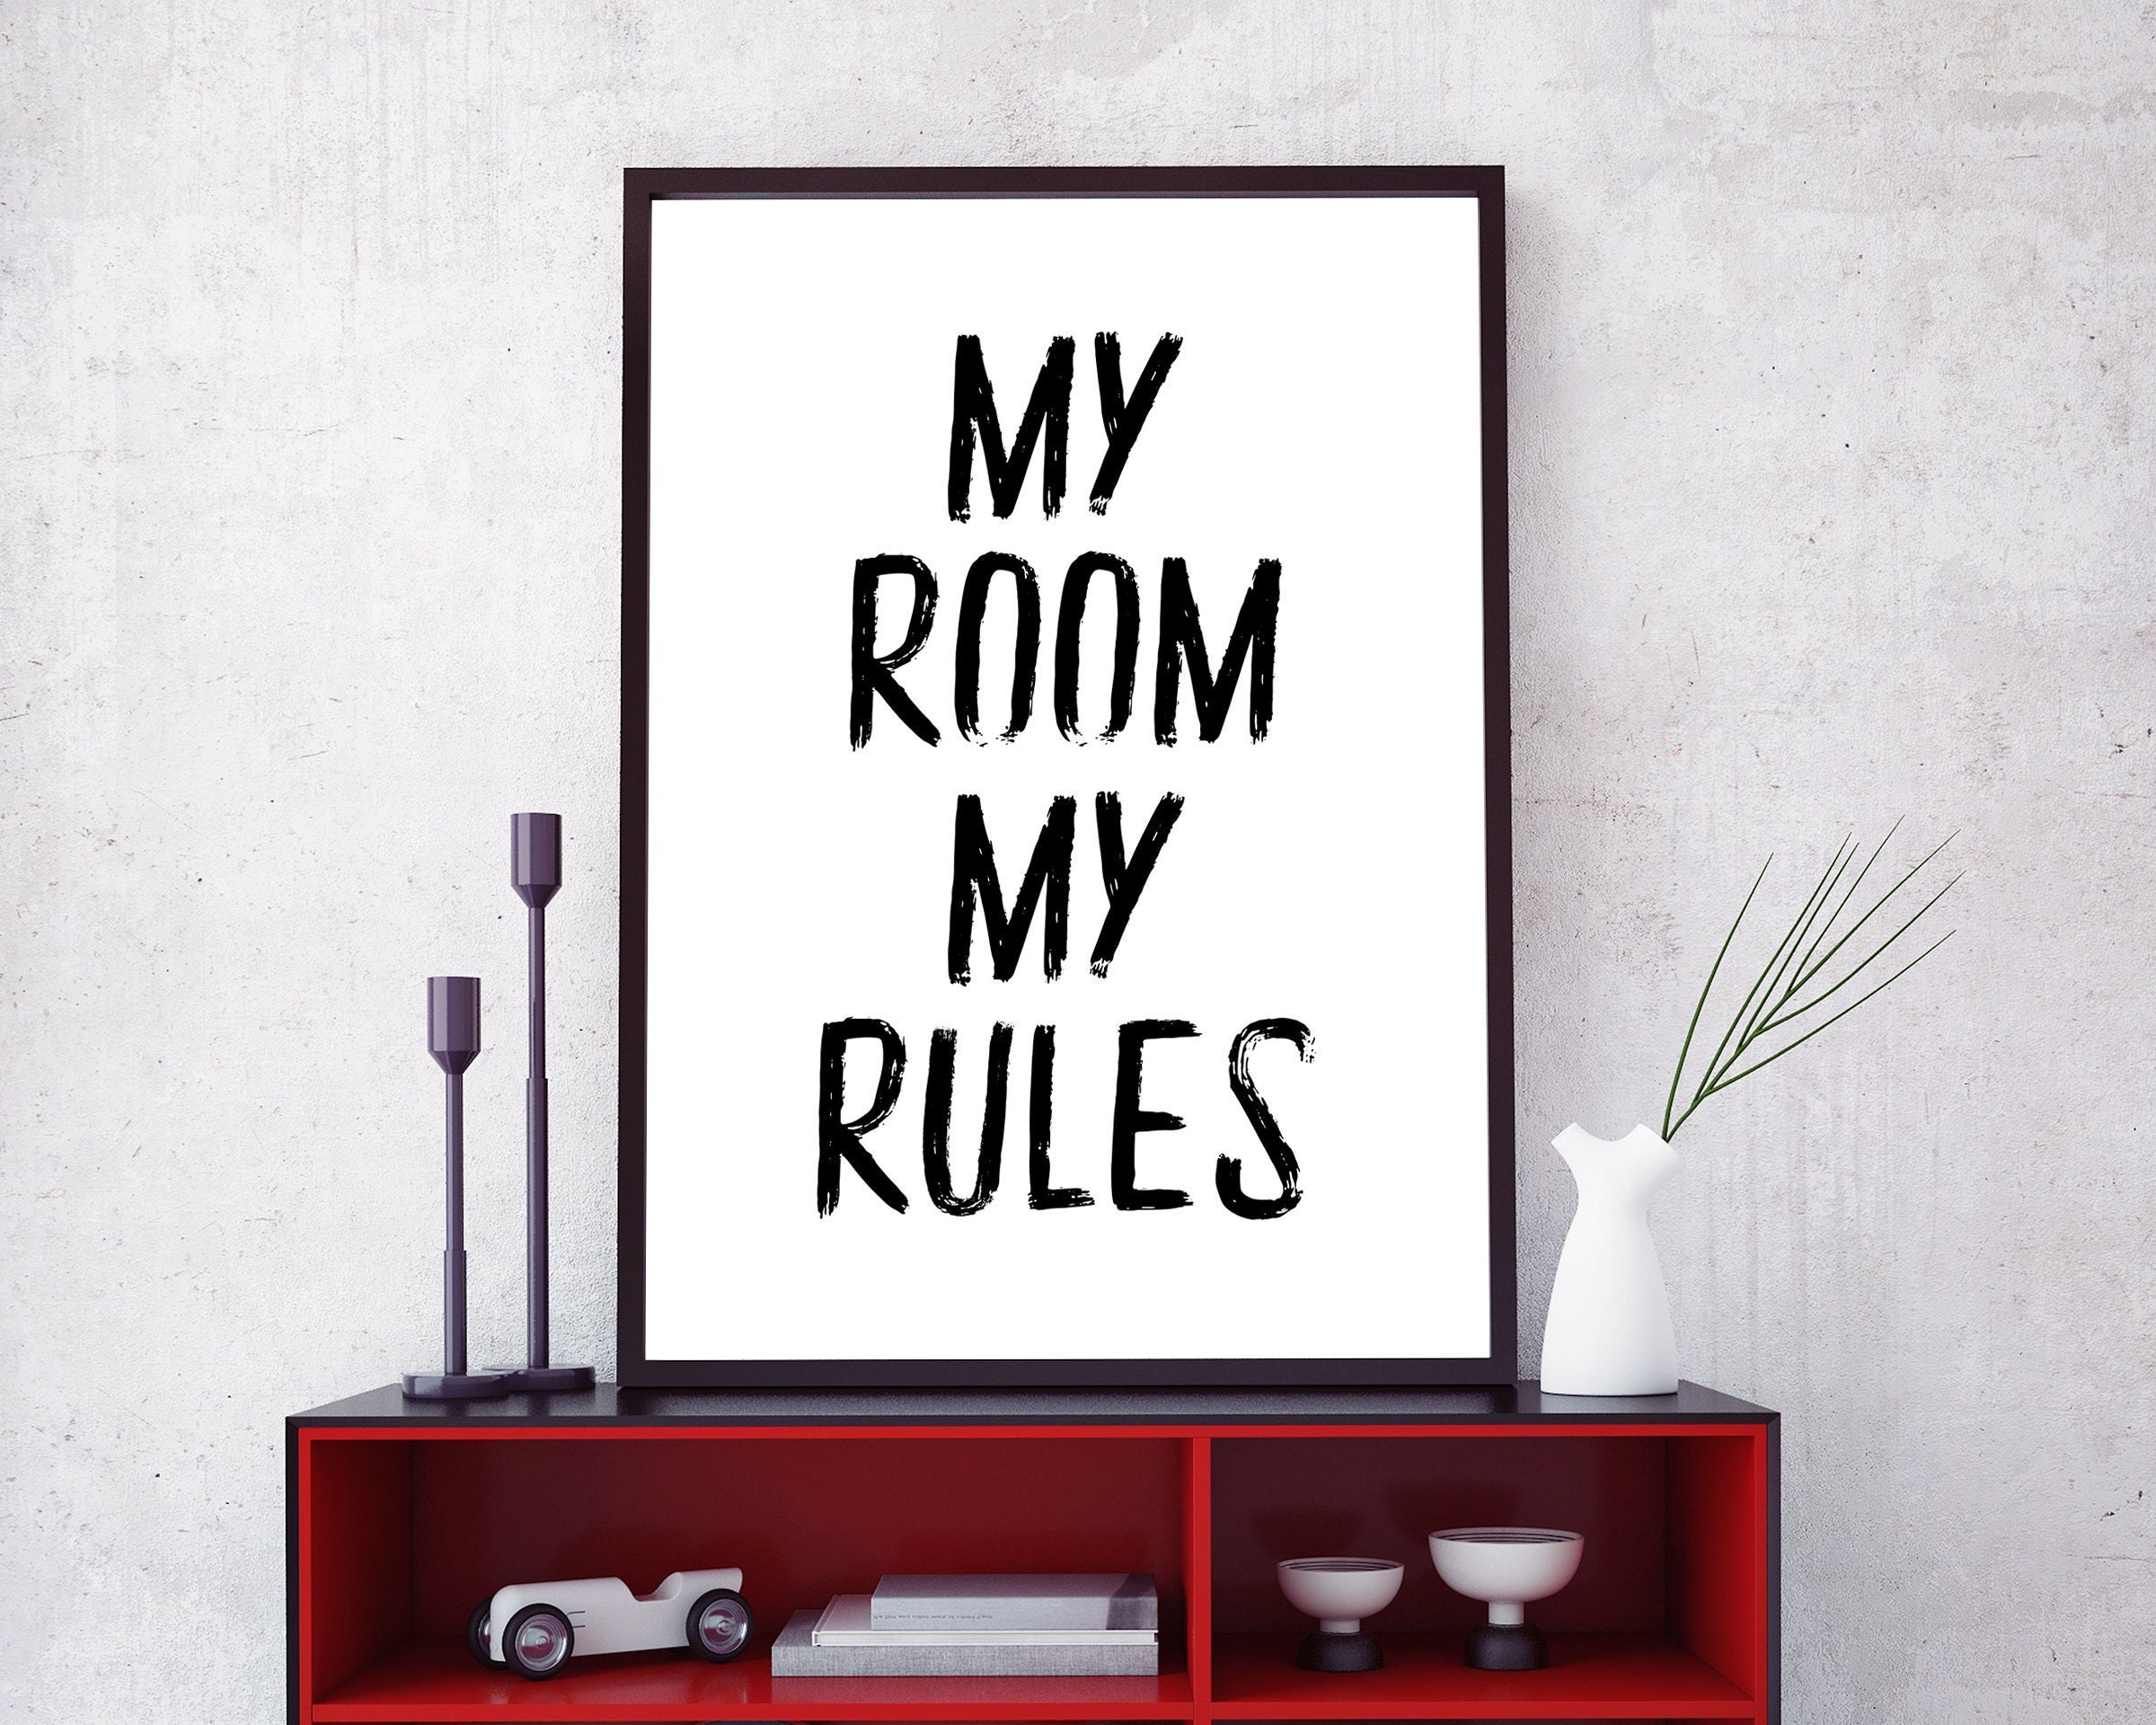 This is my rules